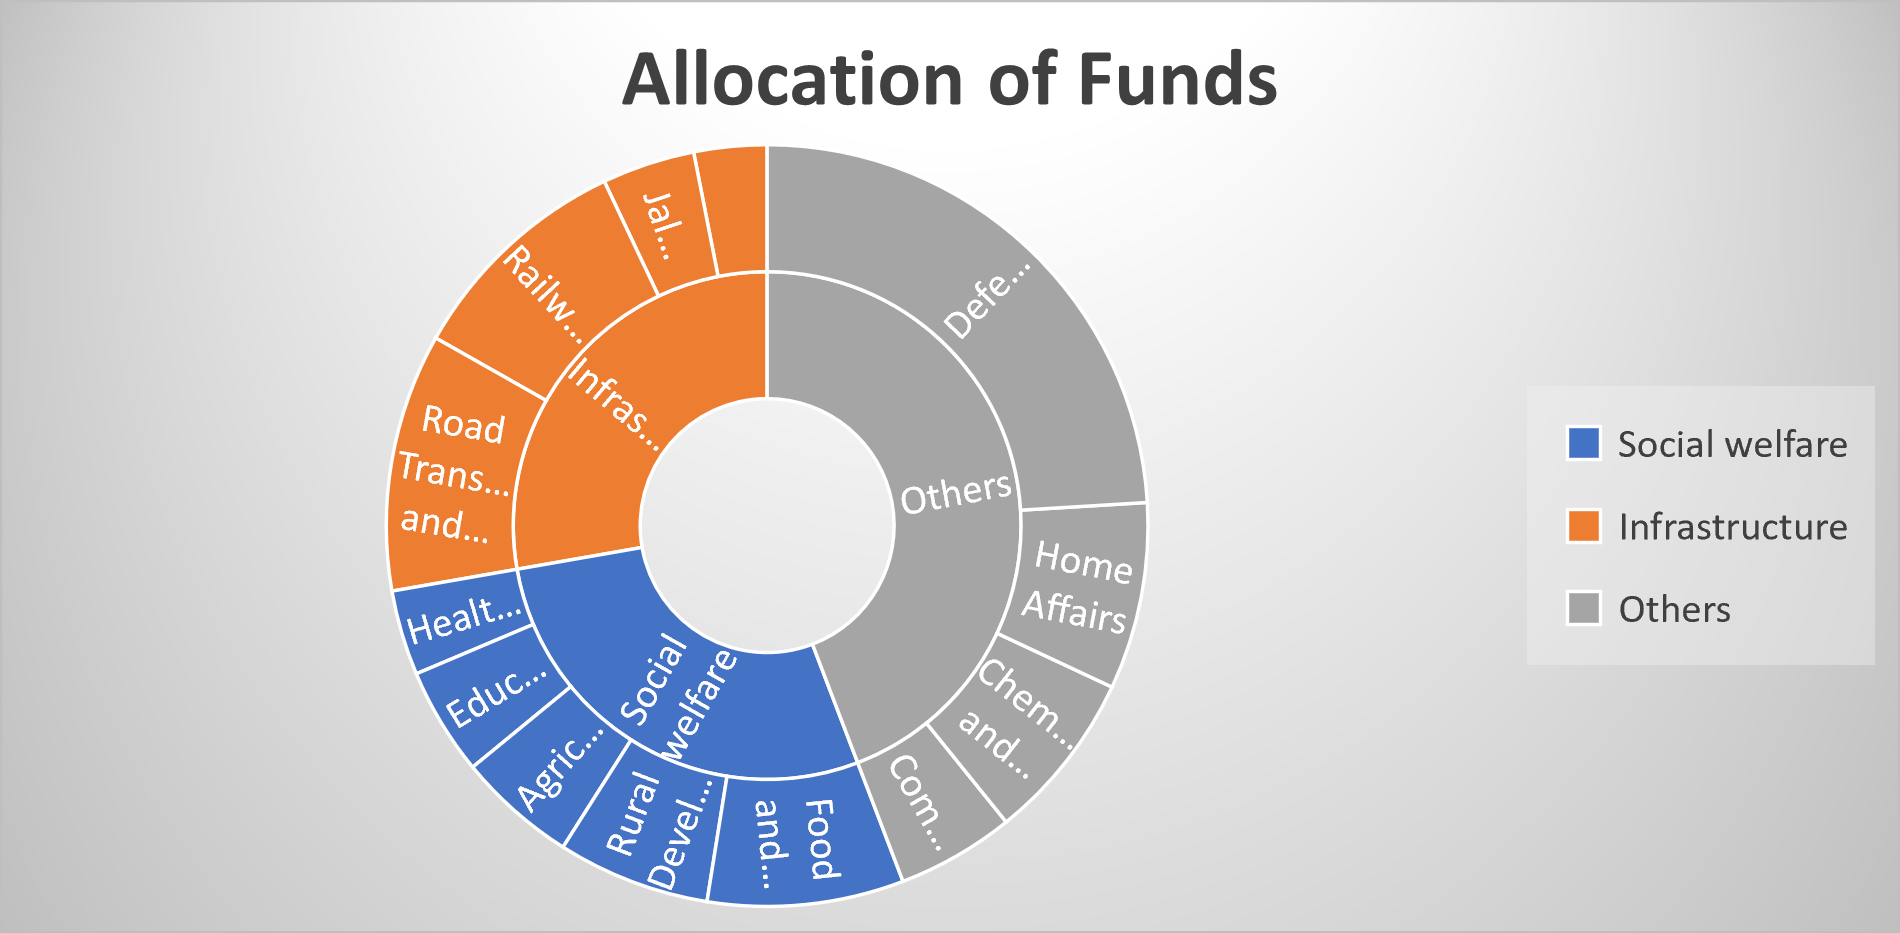 Allocation of Funds - Ministry Wise